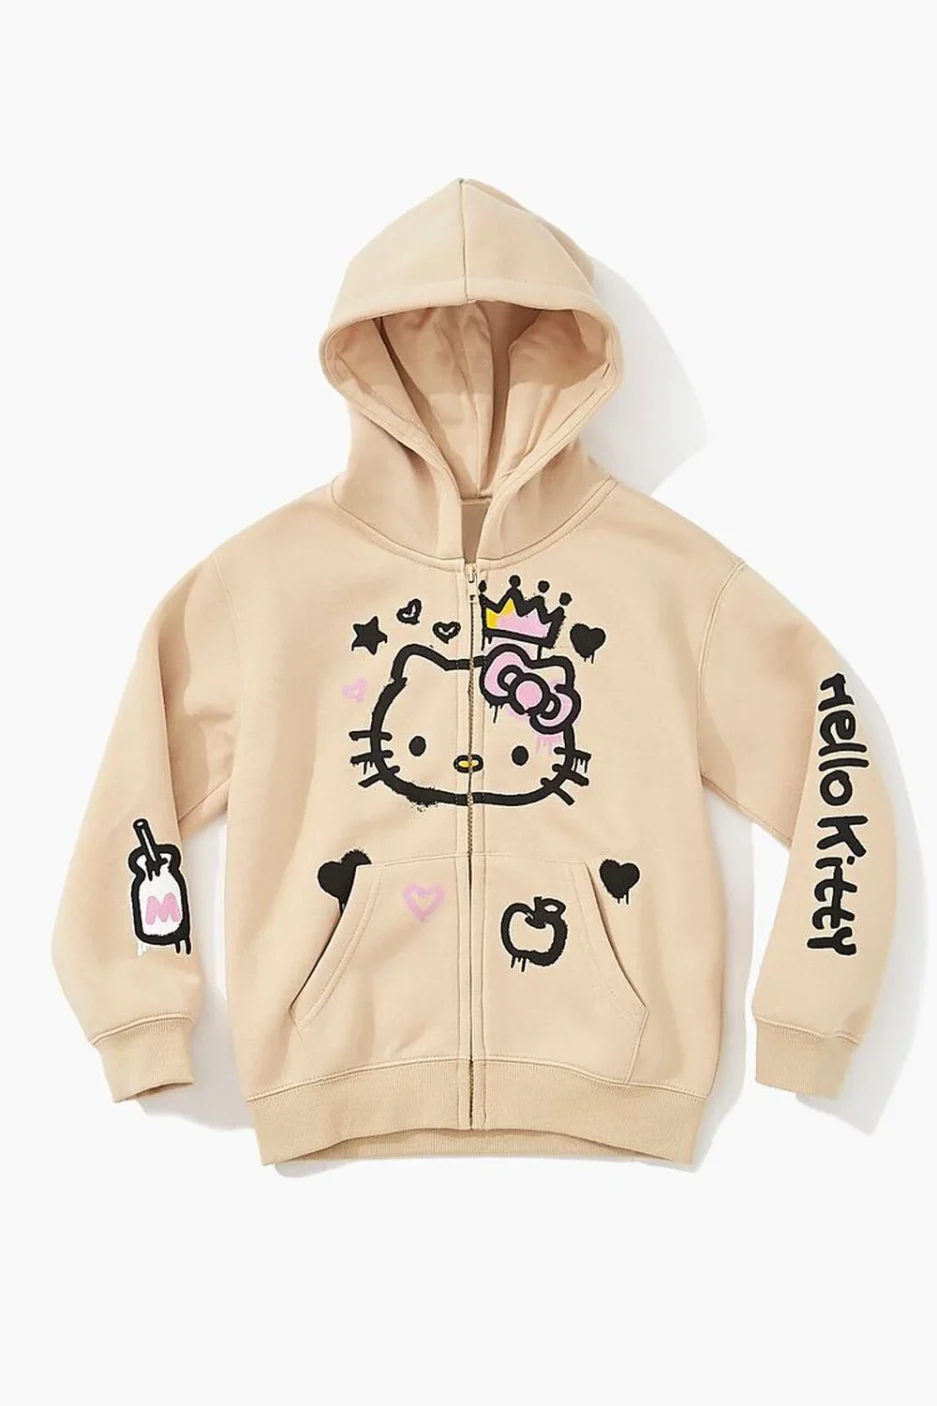 Hello Kitty Hoodie Haul The Cutest Fashion Trend of 2023